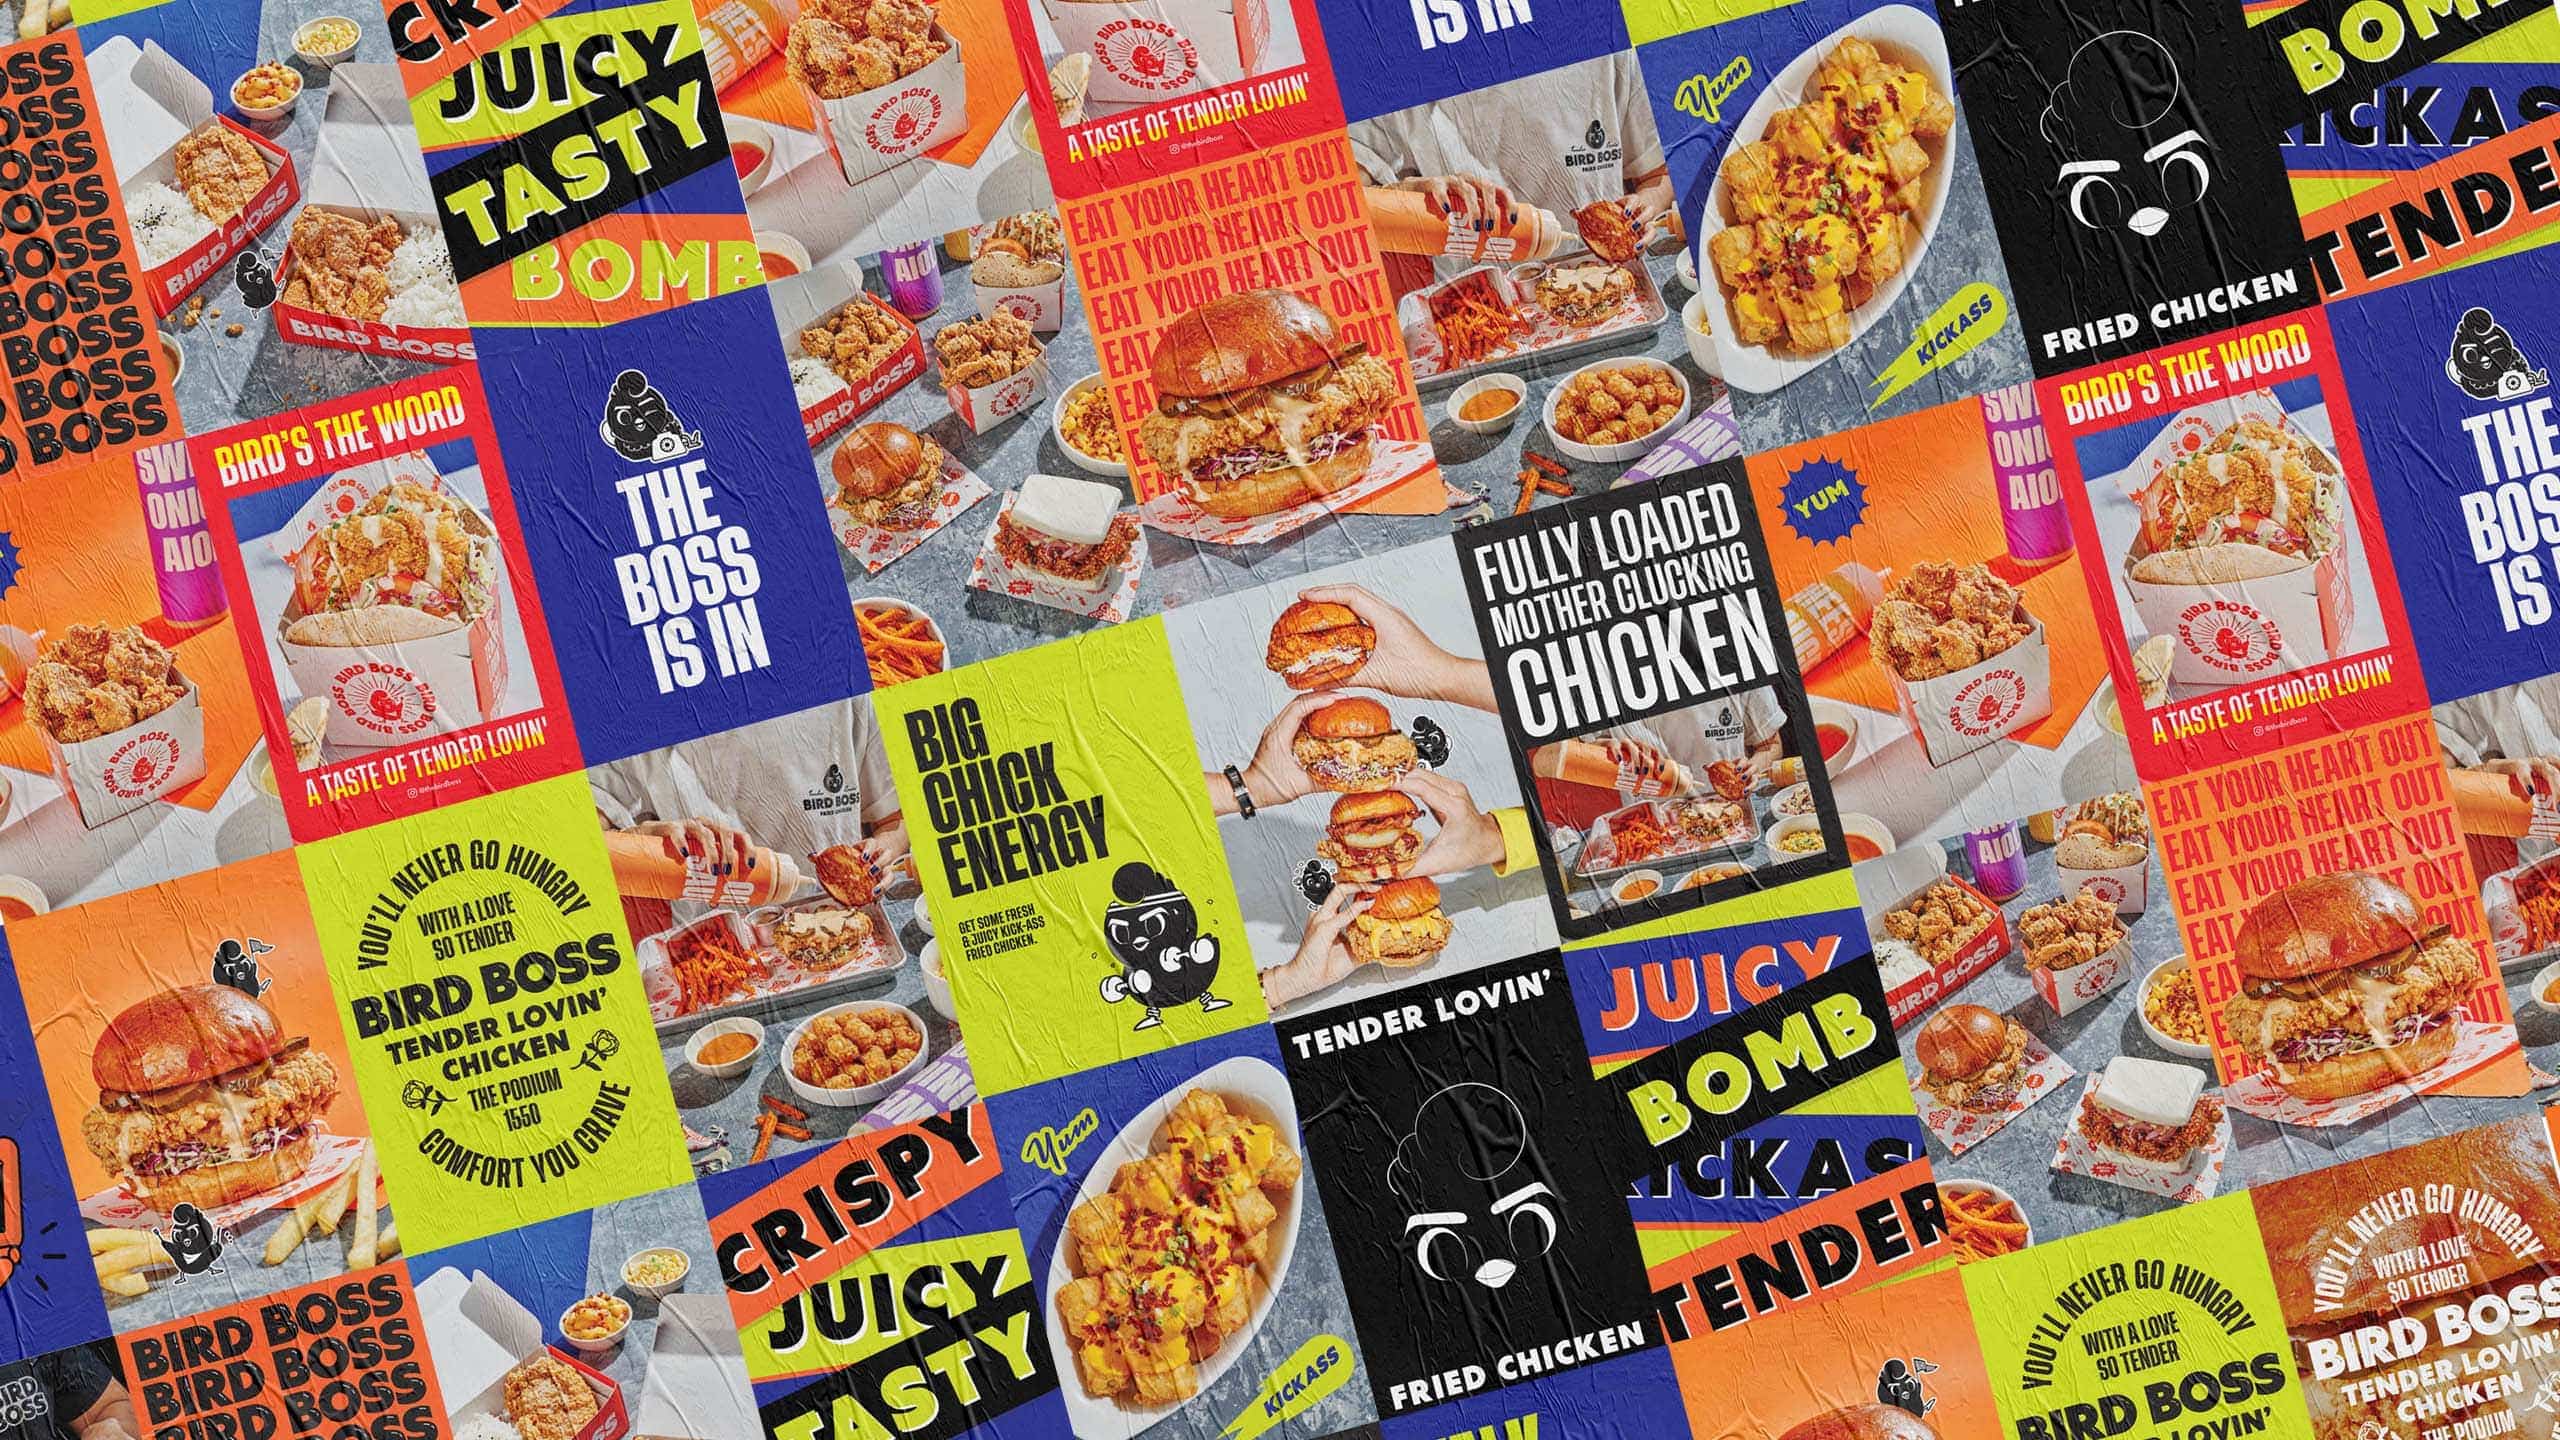 Fun and bold branding and photography applied on posters for casual chicken restaurant Bird Boss